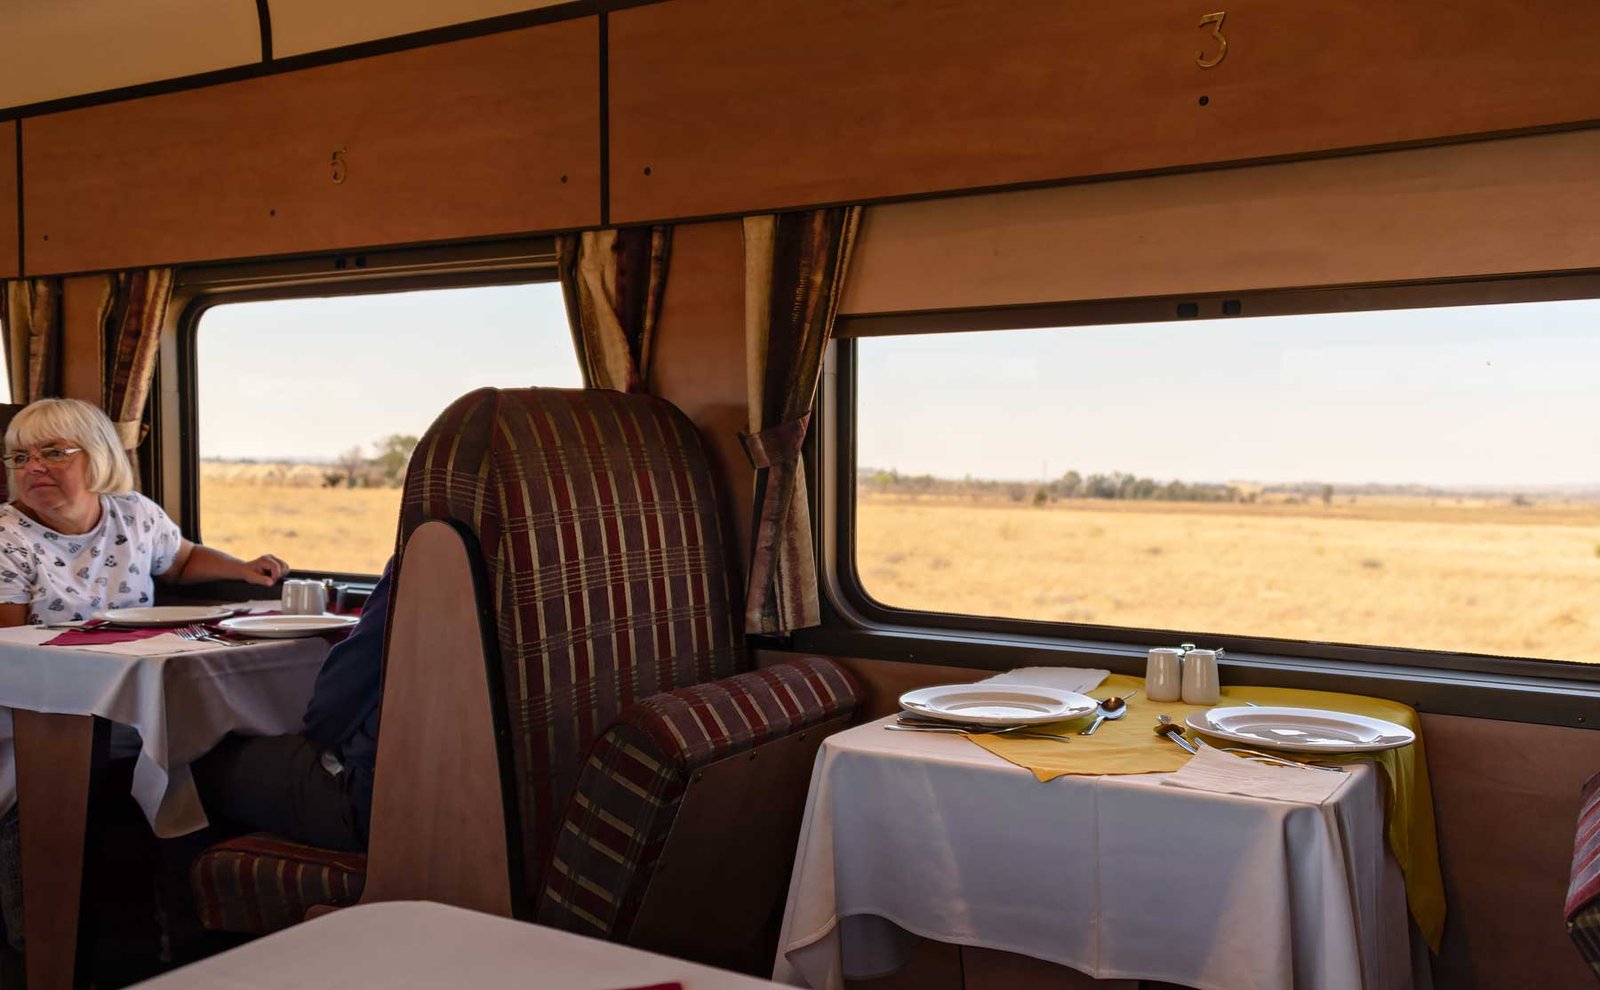 The Most Amazing 28-hour Luxury Train Ride from Johannesburg to Cape Town with Shosholoza Meyl Railways Premier Classe. Watch the video and read the full review on urbanpixxels.com 